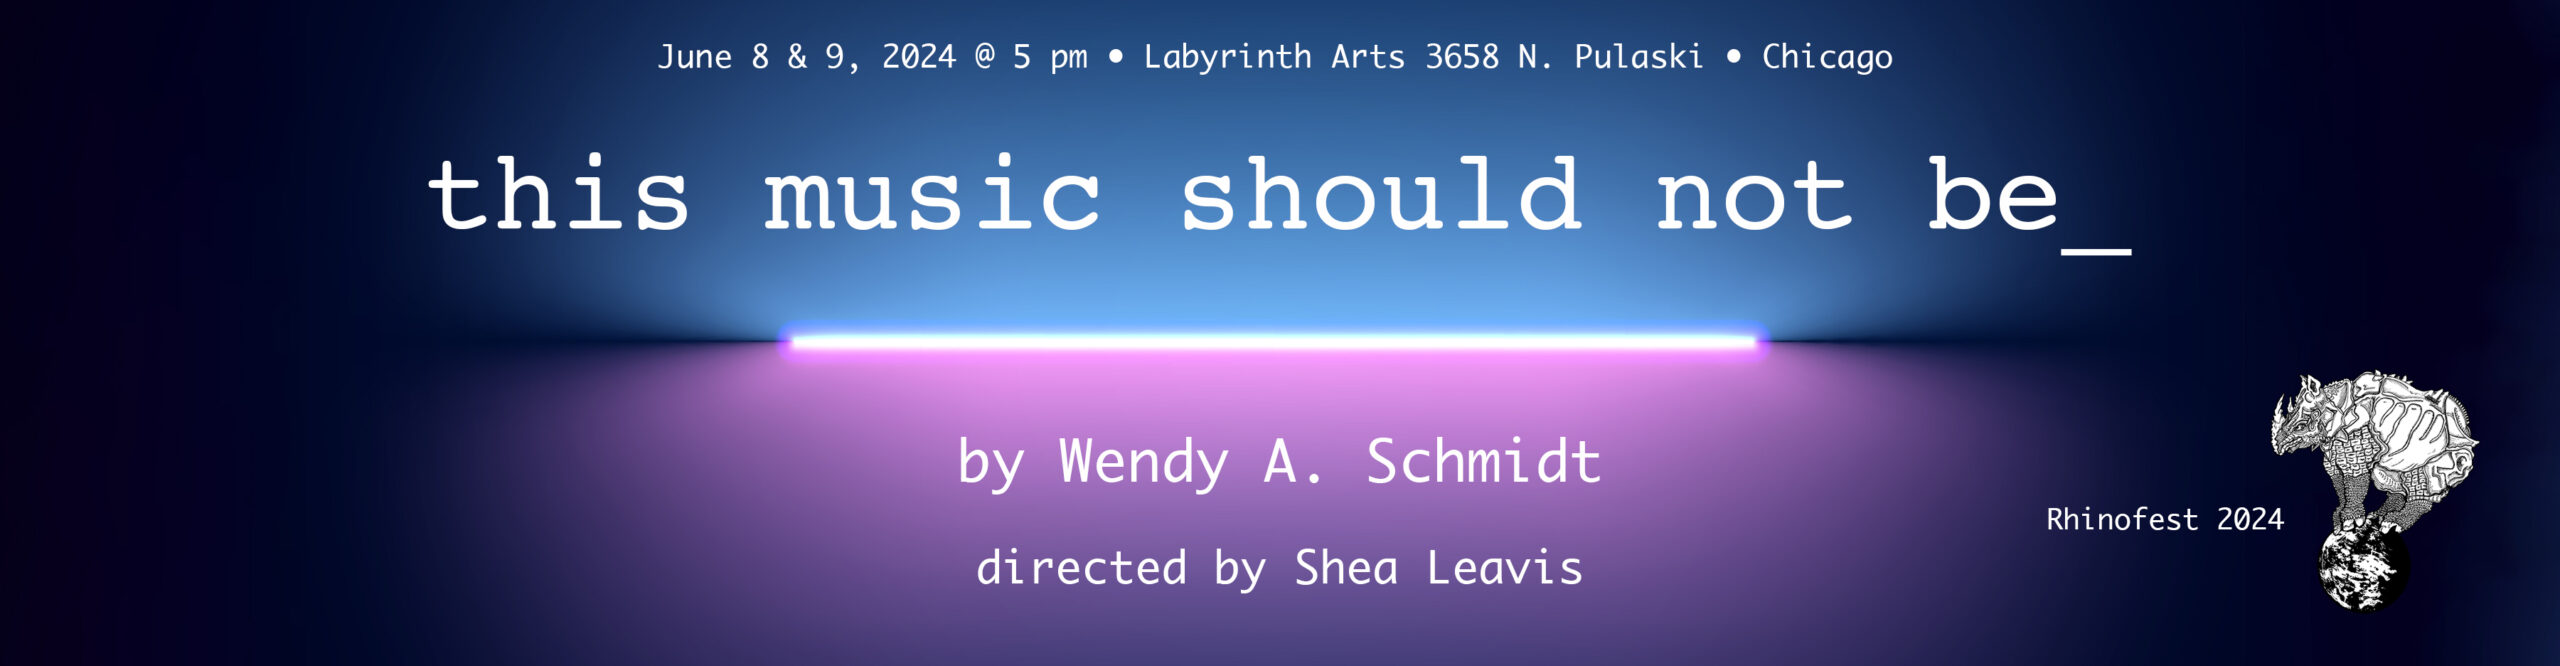 Florescent light glowing blue and pink with the words "This Music Should Not Be by Wendy A. Schmidt, directed by Shea Leavis"